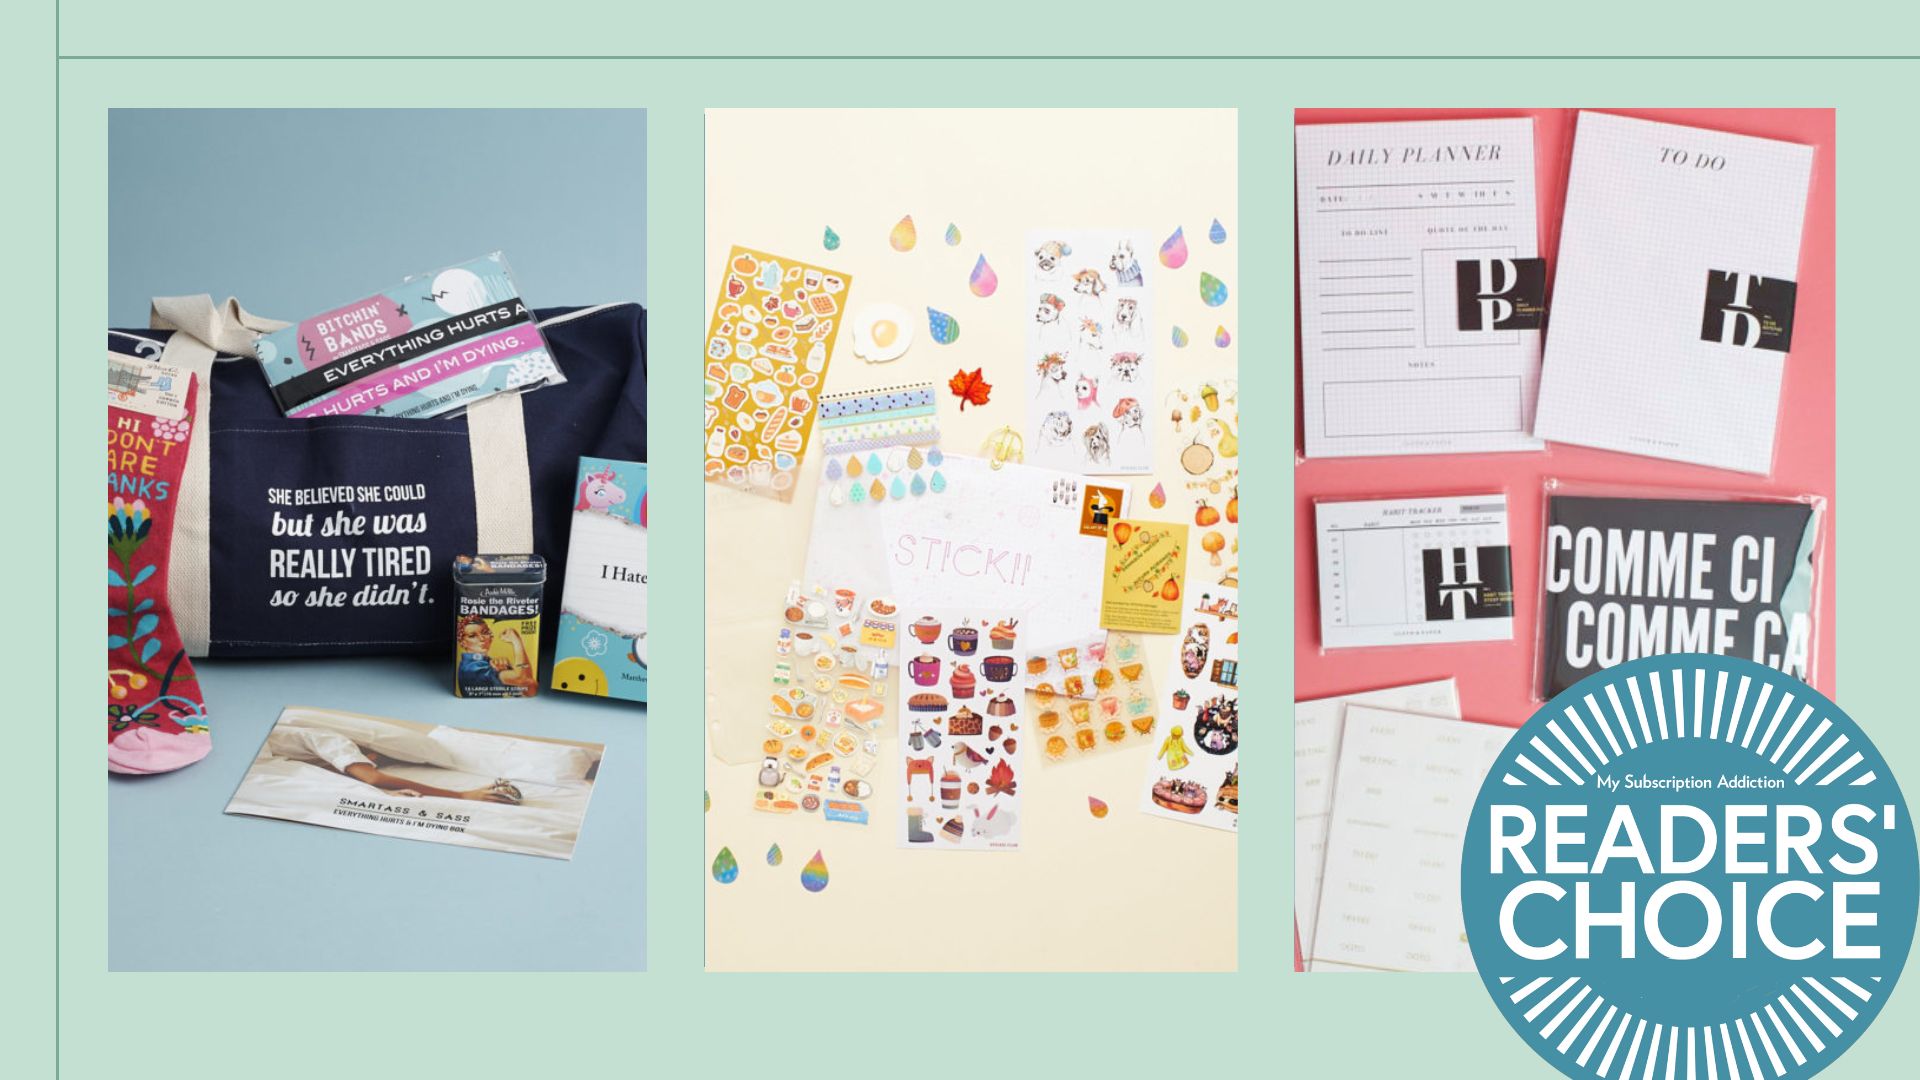 The 13 Best Stationery Brands of 2023